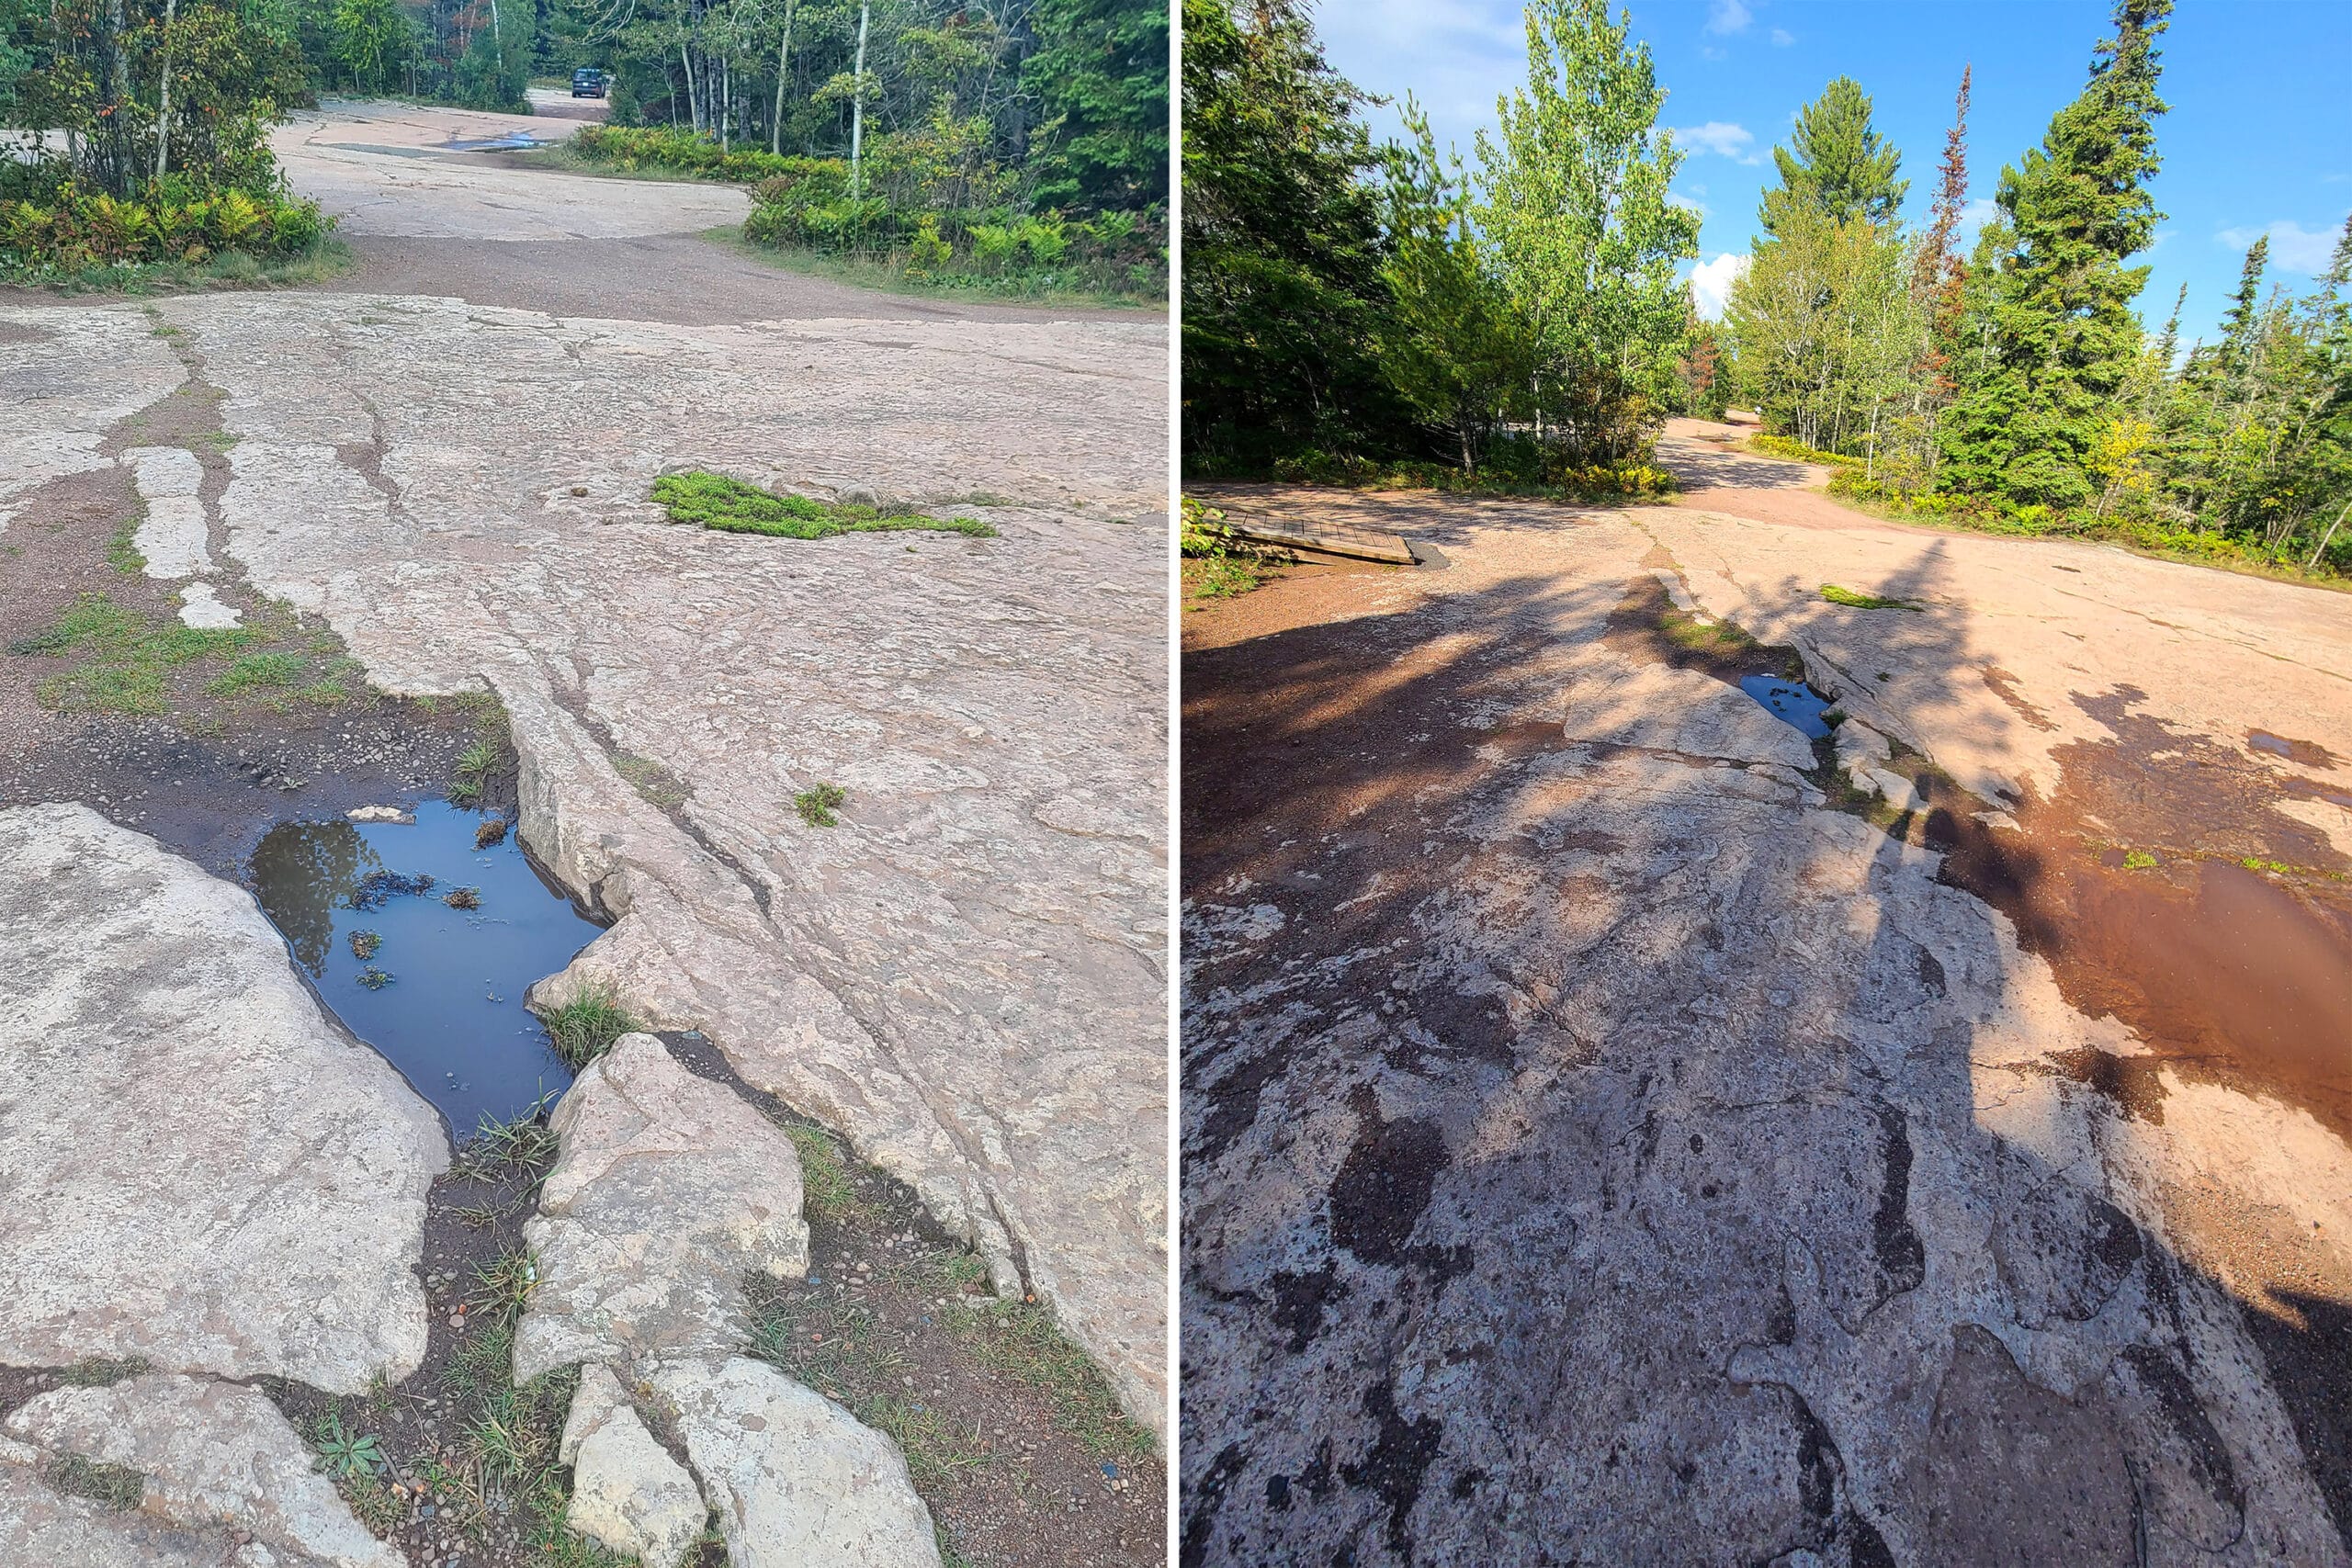 2 part image showing a rough, rocky, pitted road in sleeping giant provincial park.